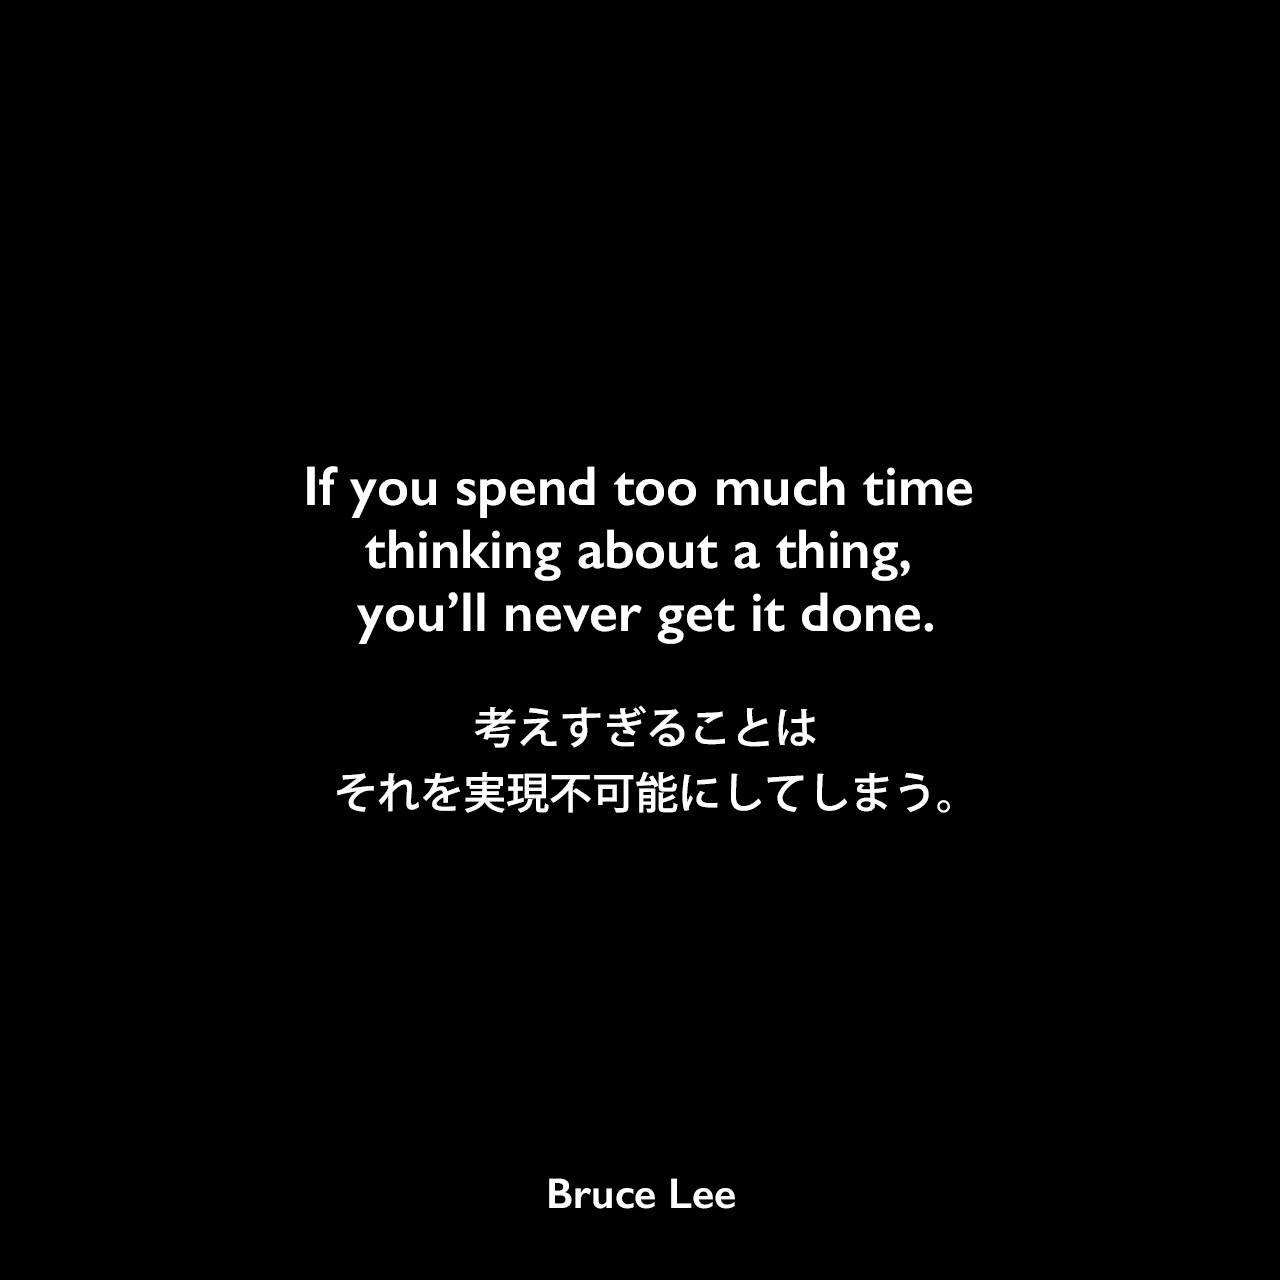 If you spend too much time thinking about a thing, you’ll never get it done.考えすぎることは、それを実現不可能にしてしまう。- ブルース・リーの本「ブルース・リーが語るストライキング・ソーツ」よりBruce Lee